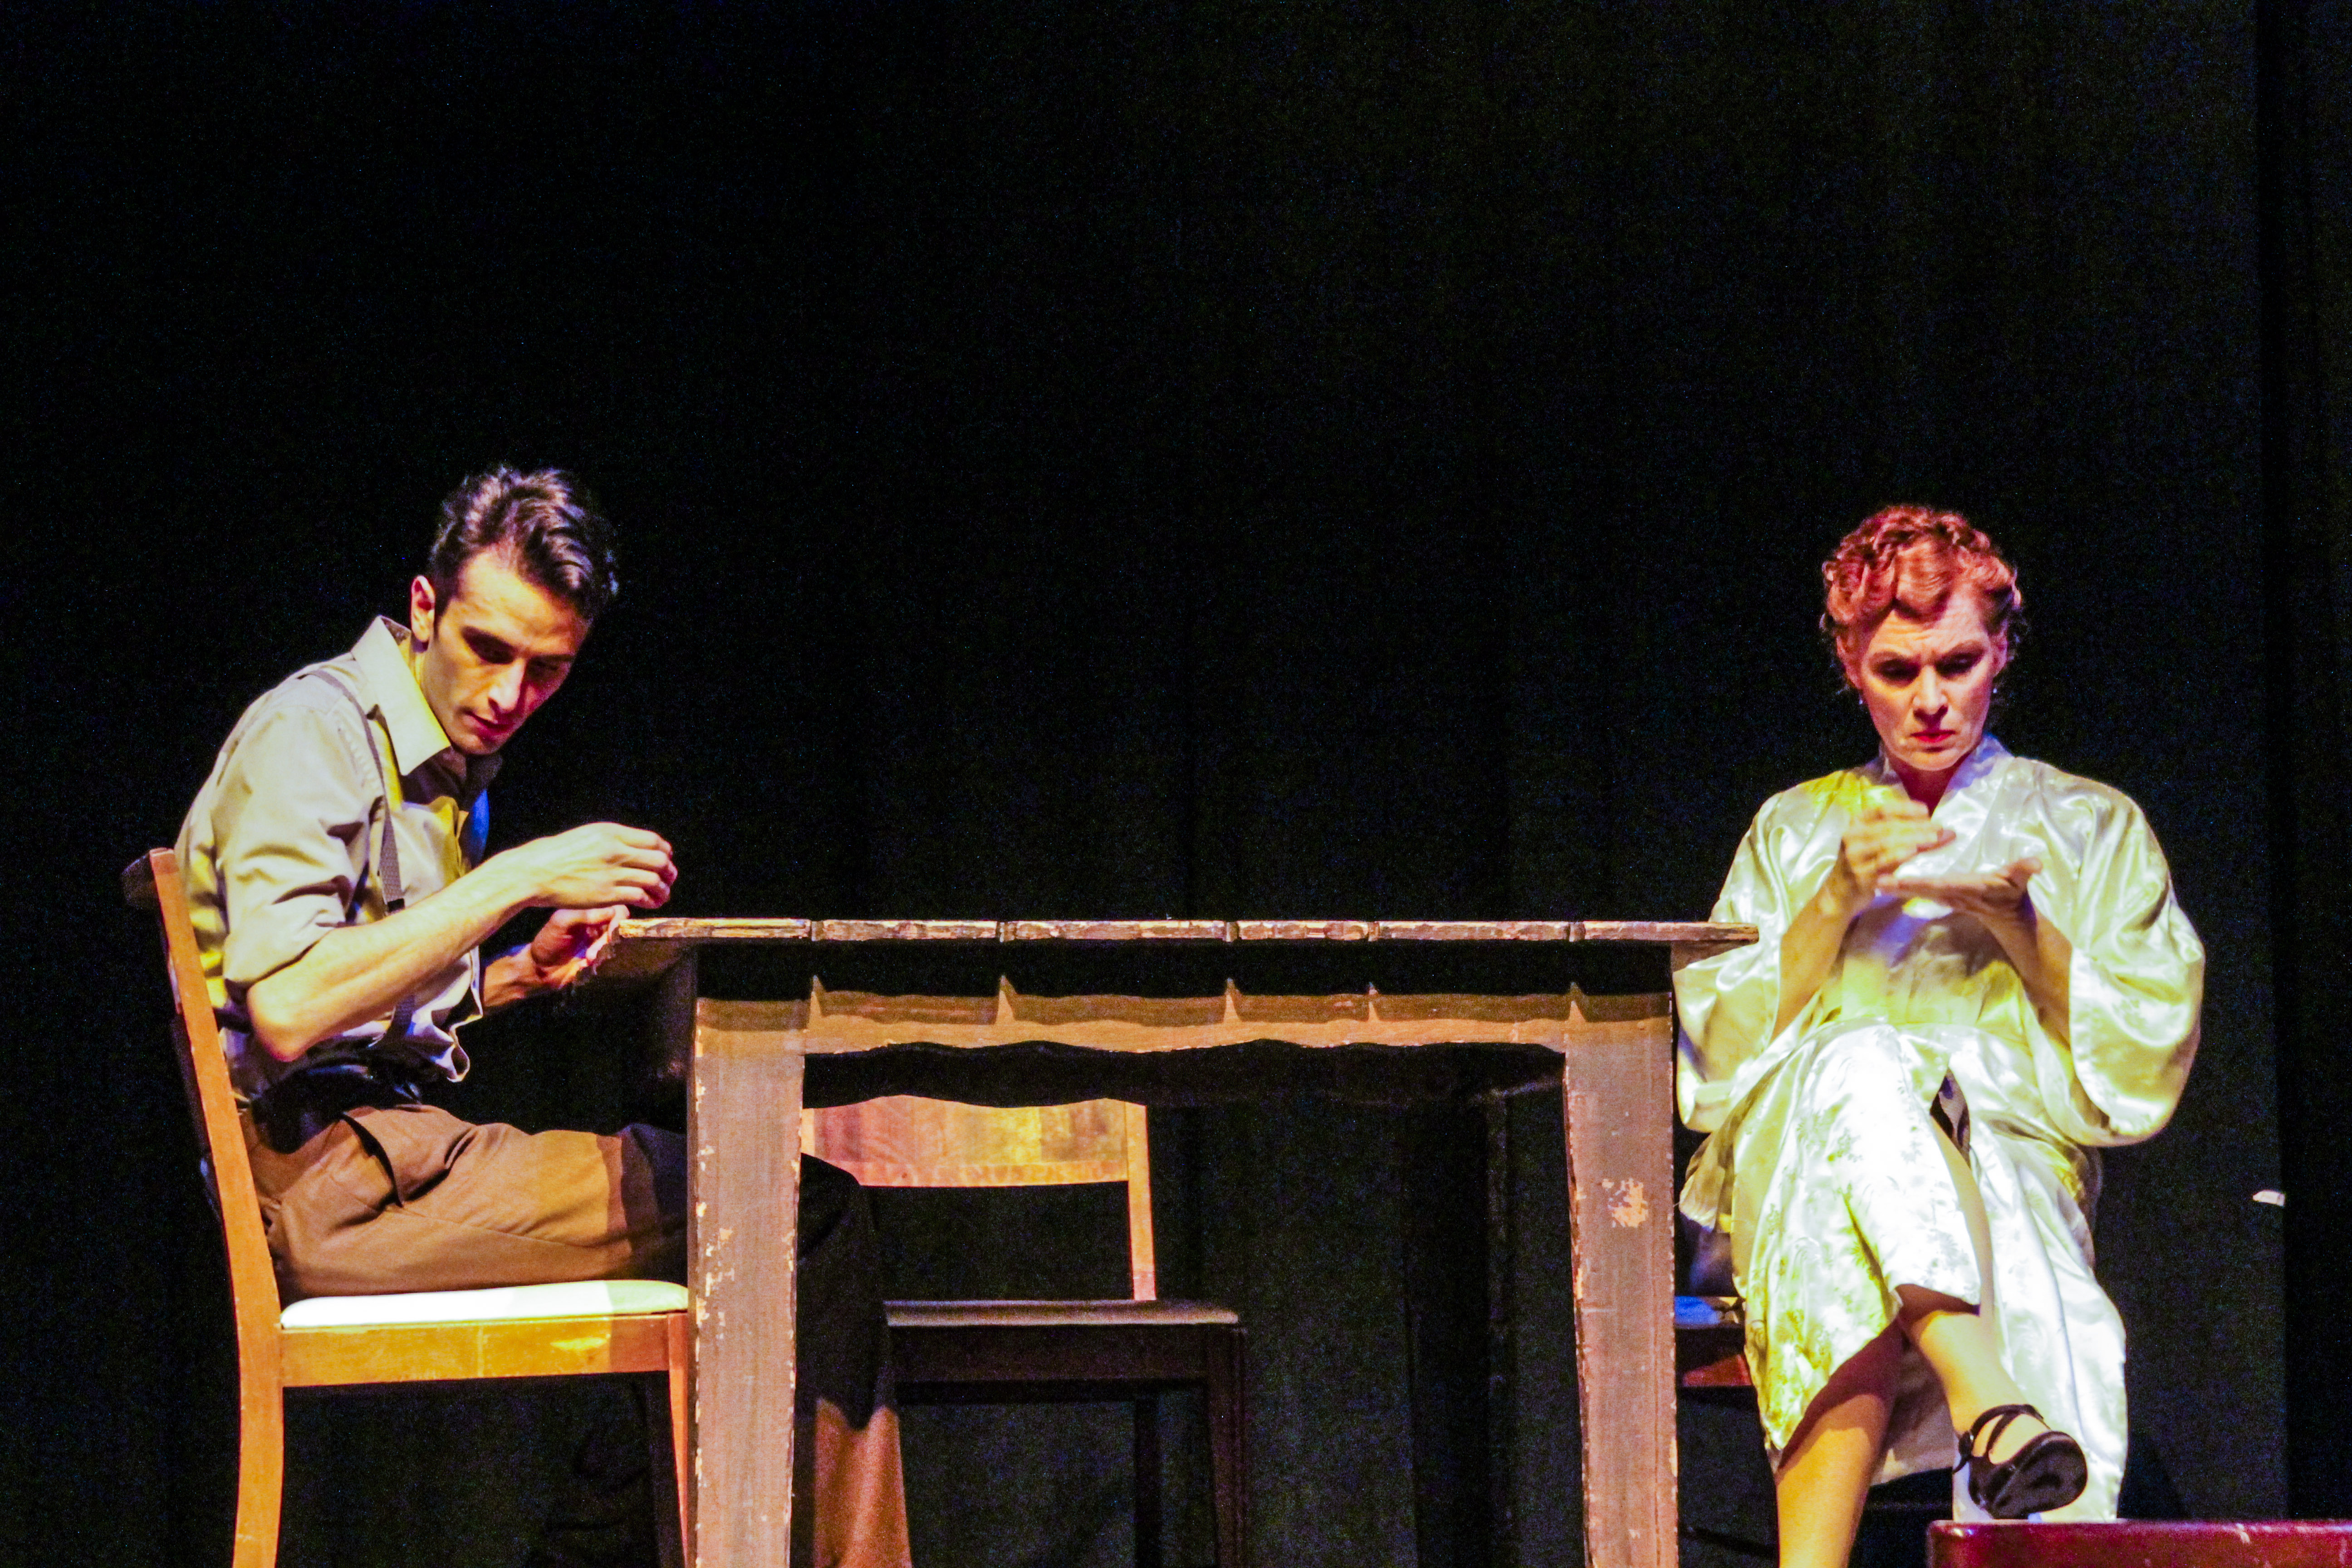 Tom (right, performed by Sean LaRocca) and his mother Amanda (right, performed by Heidi Bridges) sit at the same table although worlds apart in The Glass Menagerie playing at Palomar College. Lucas Spenser/Telescope.